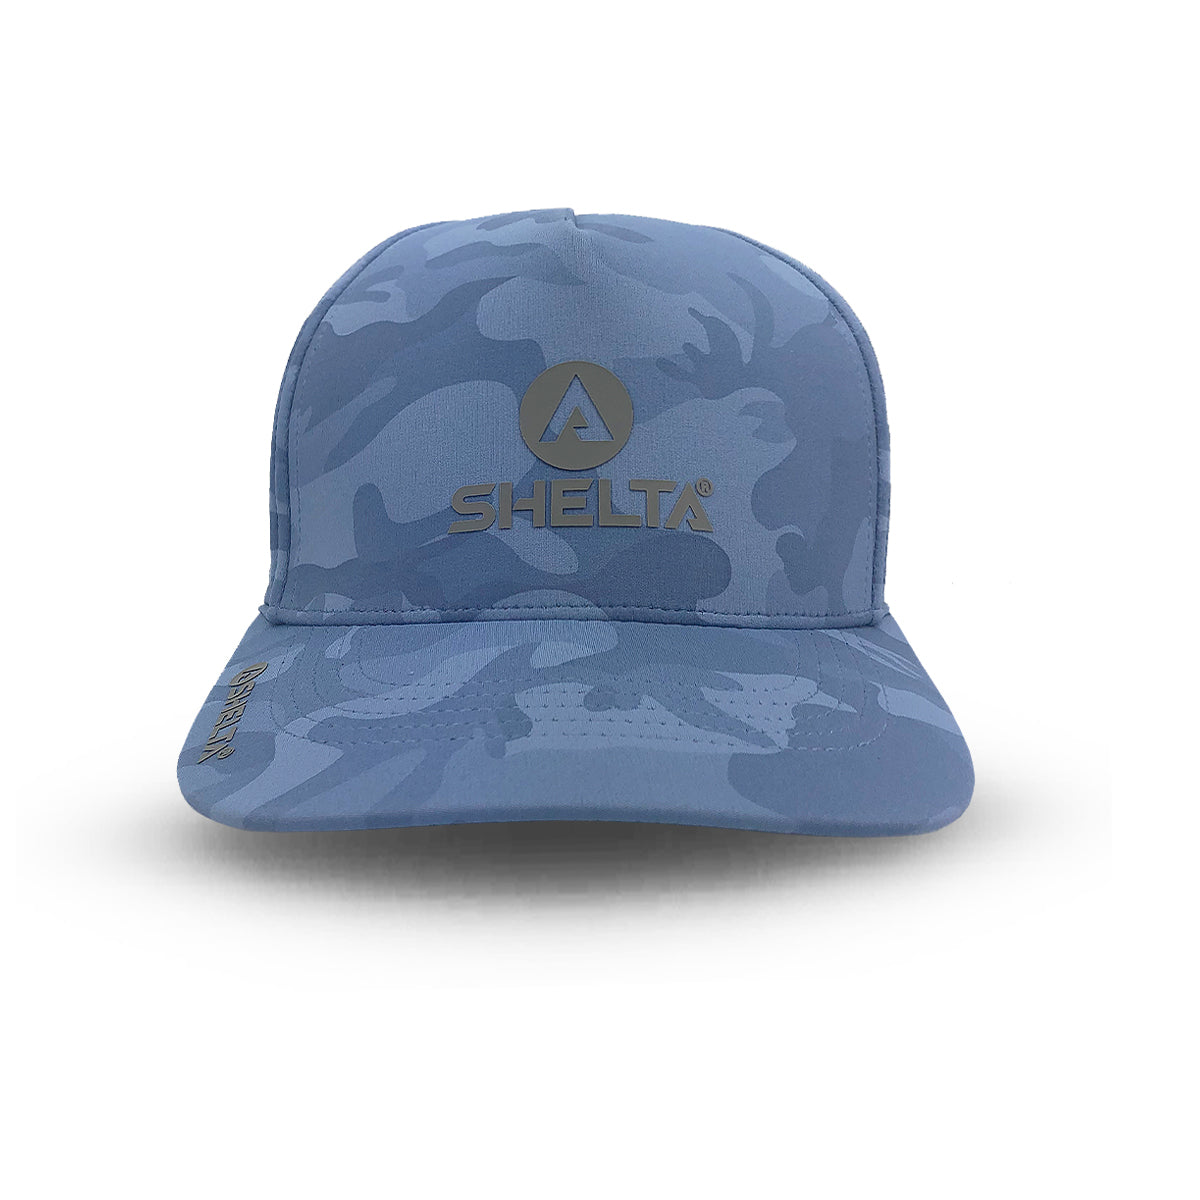 Front view of the Blue Hector Cap